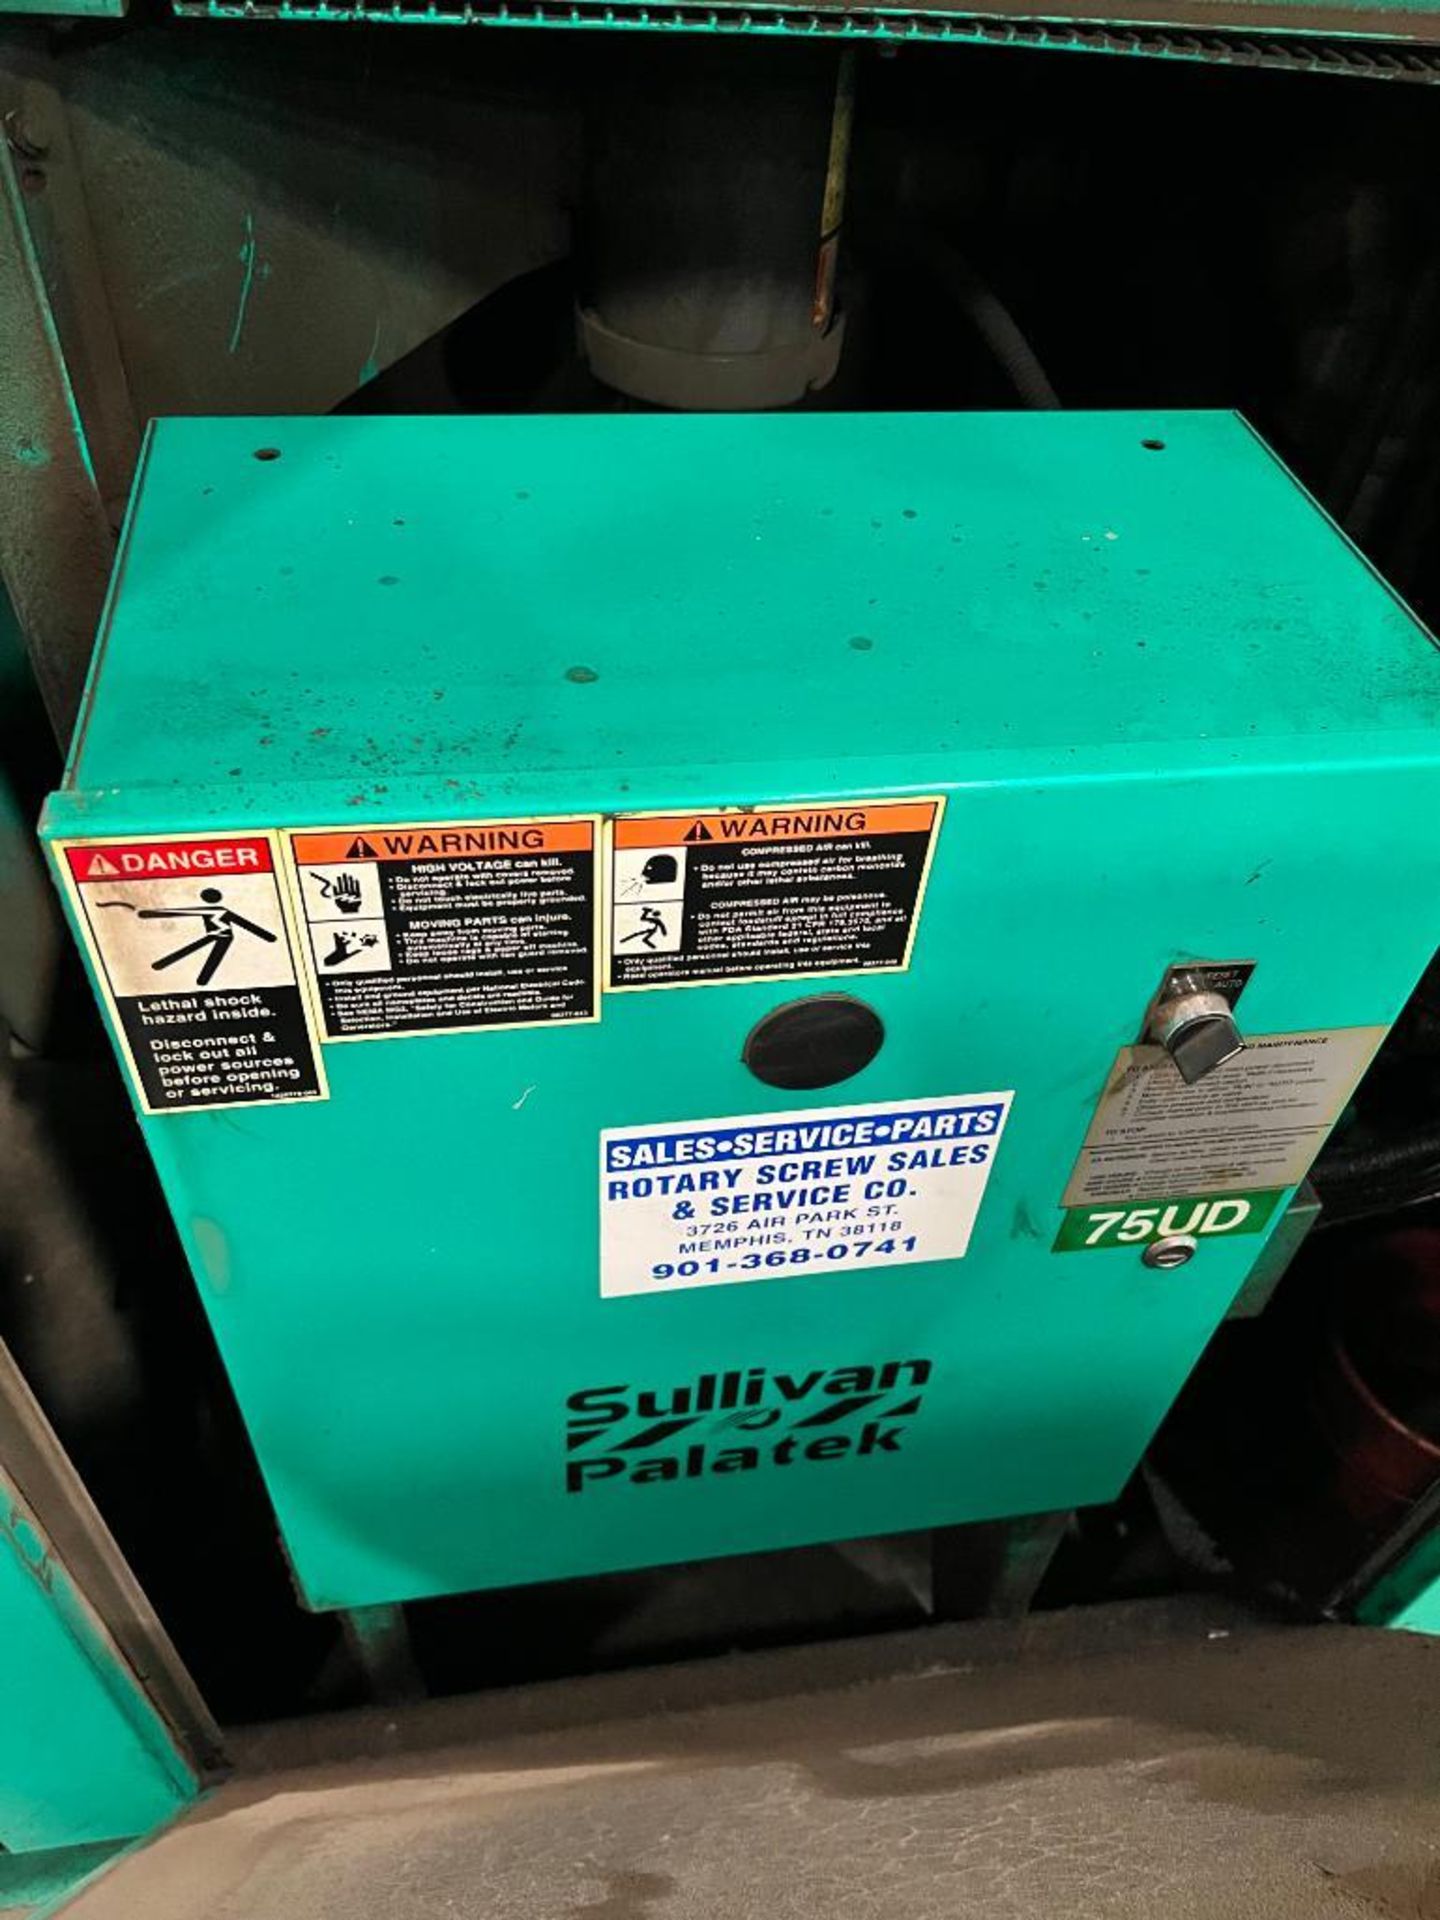 Sullivan-Palatek Air Compressor, Model 75UD, 3 Phase ($50 Loading fee will be added to buyers invoic - Image 4 of 5